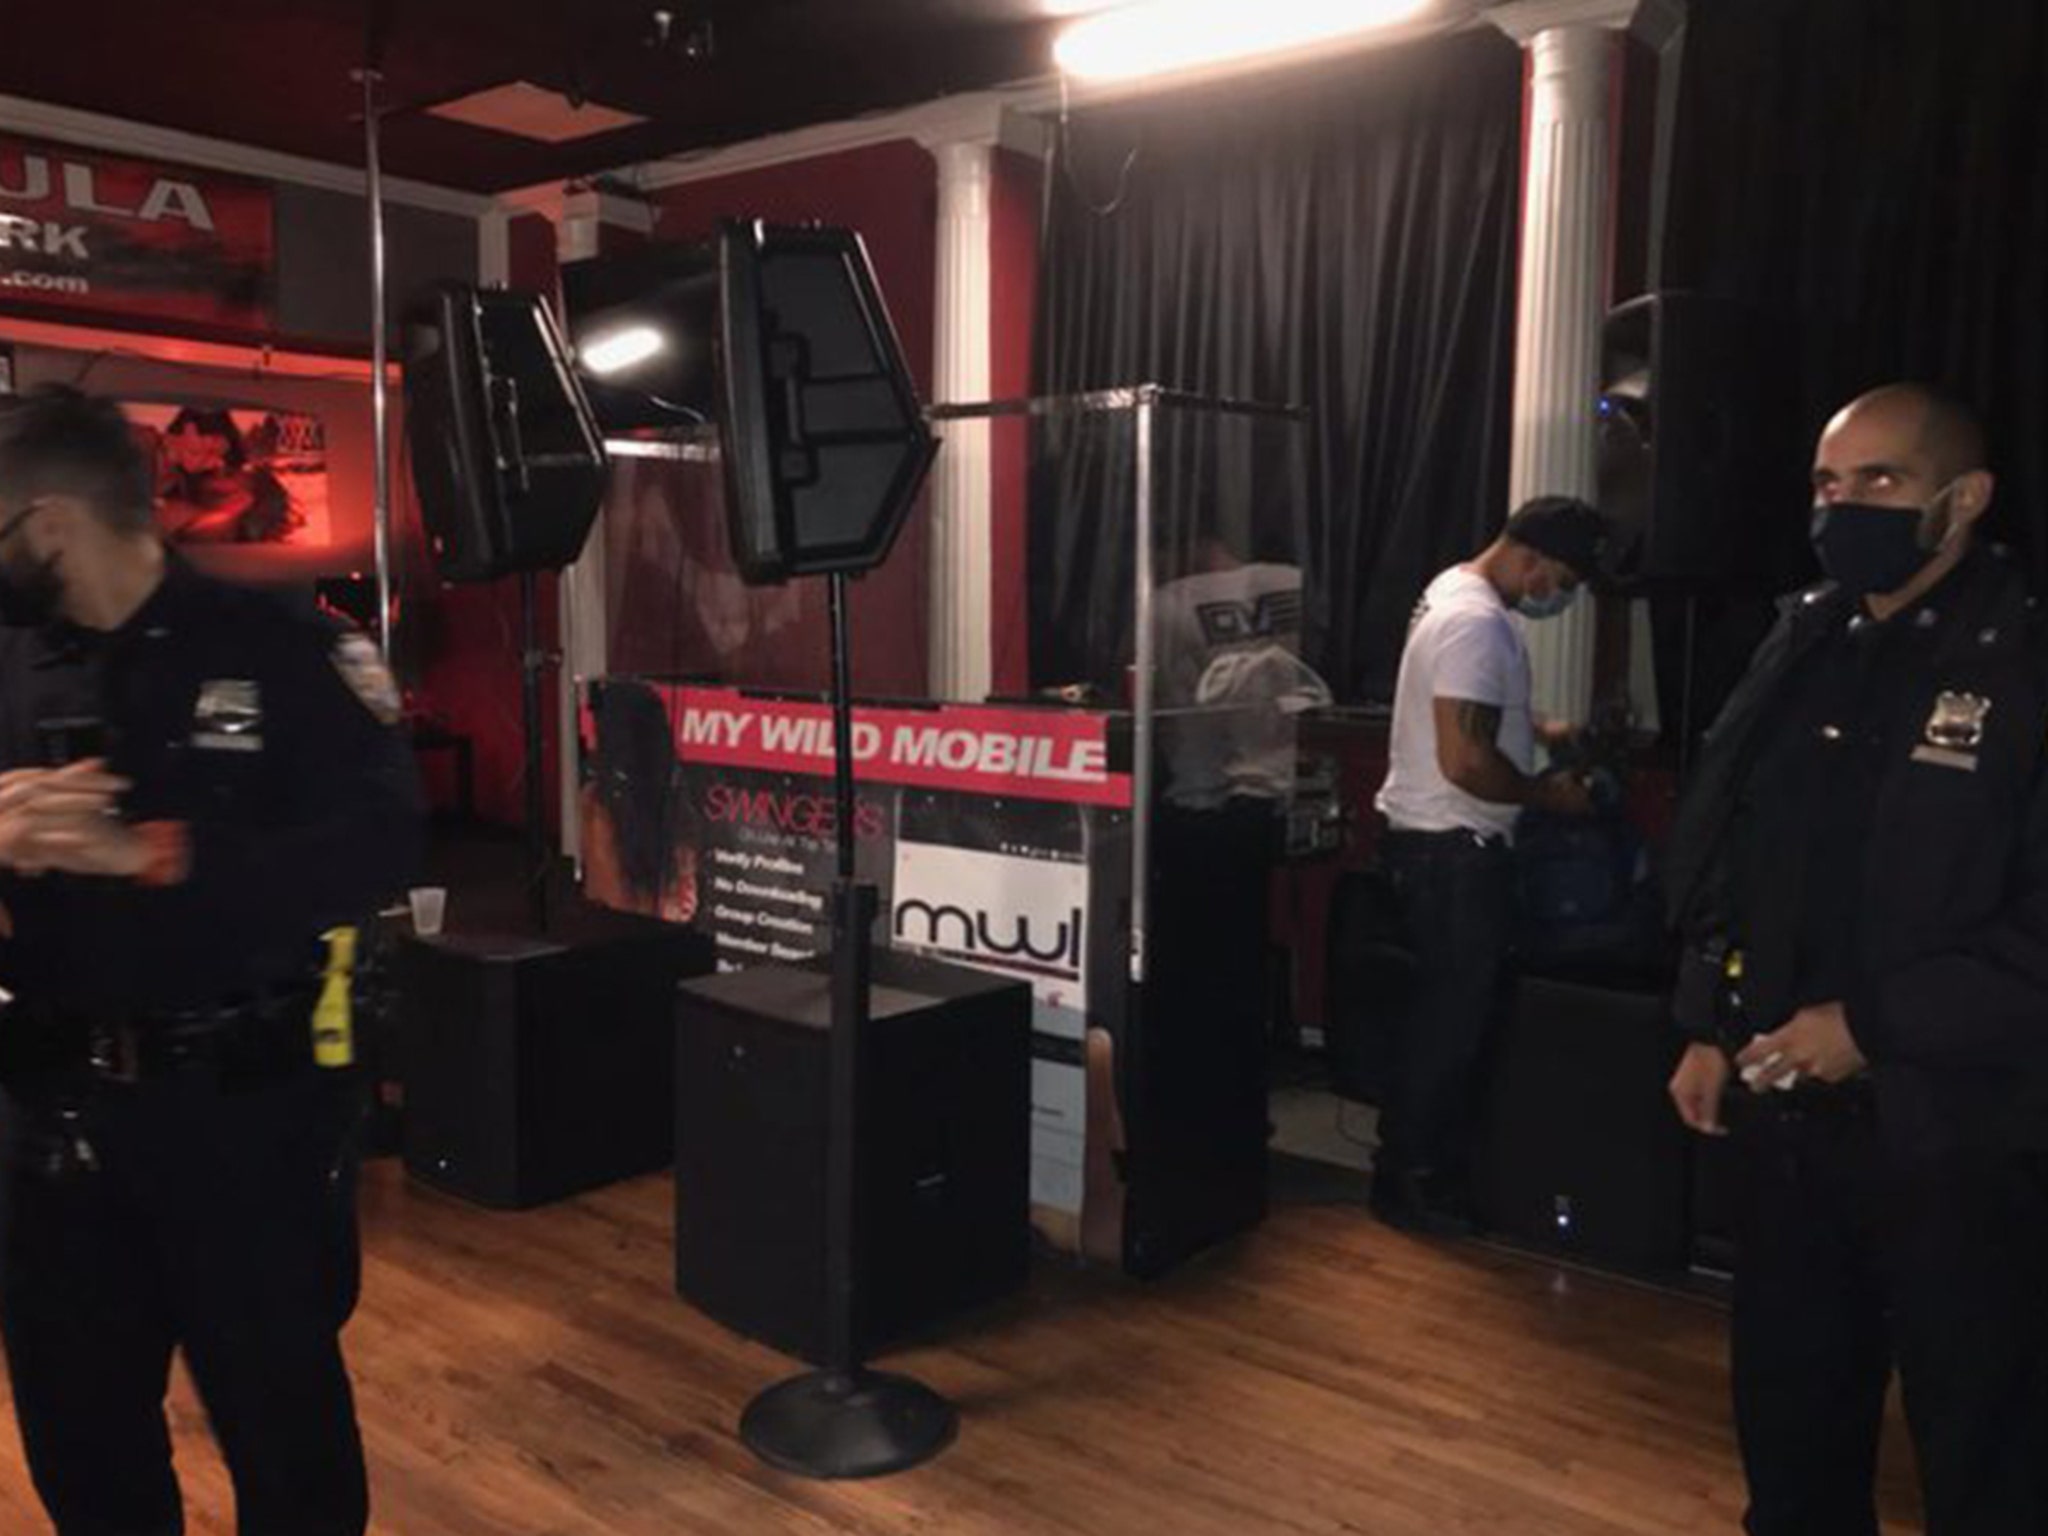 NYC Underground Swingers Party Broken Up By Sheriffs Deputies picture